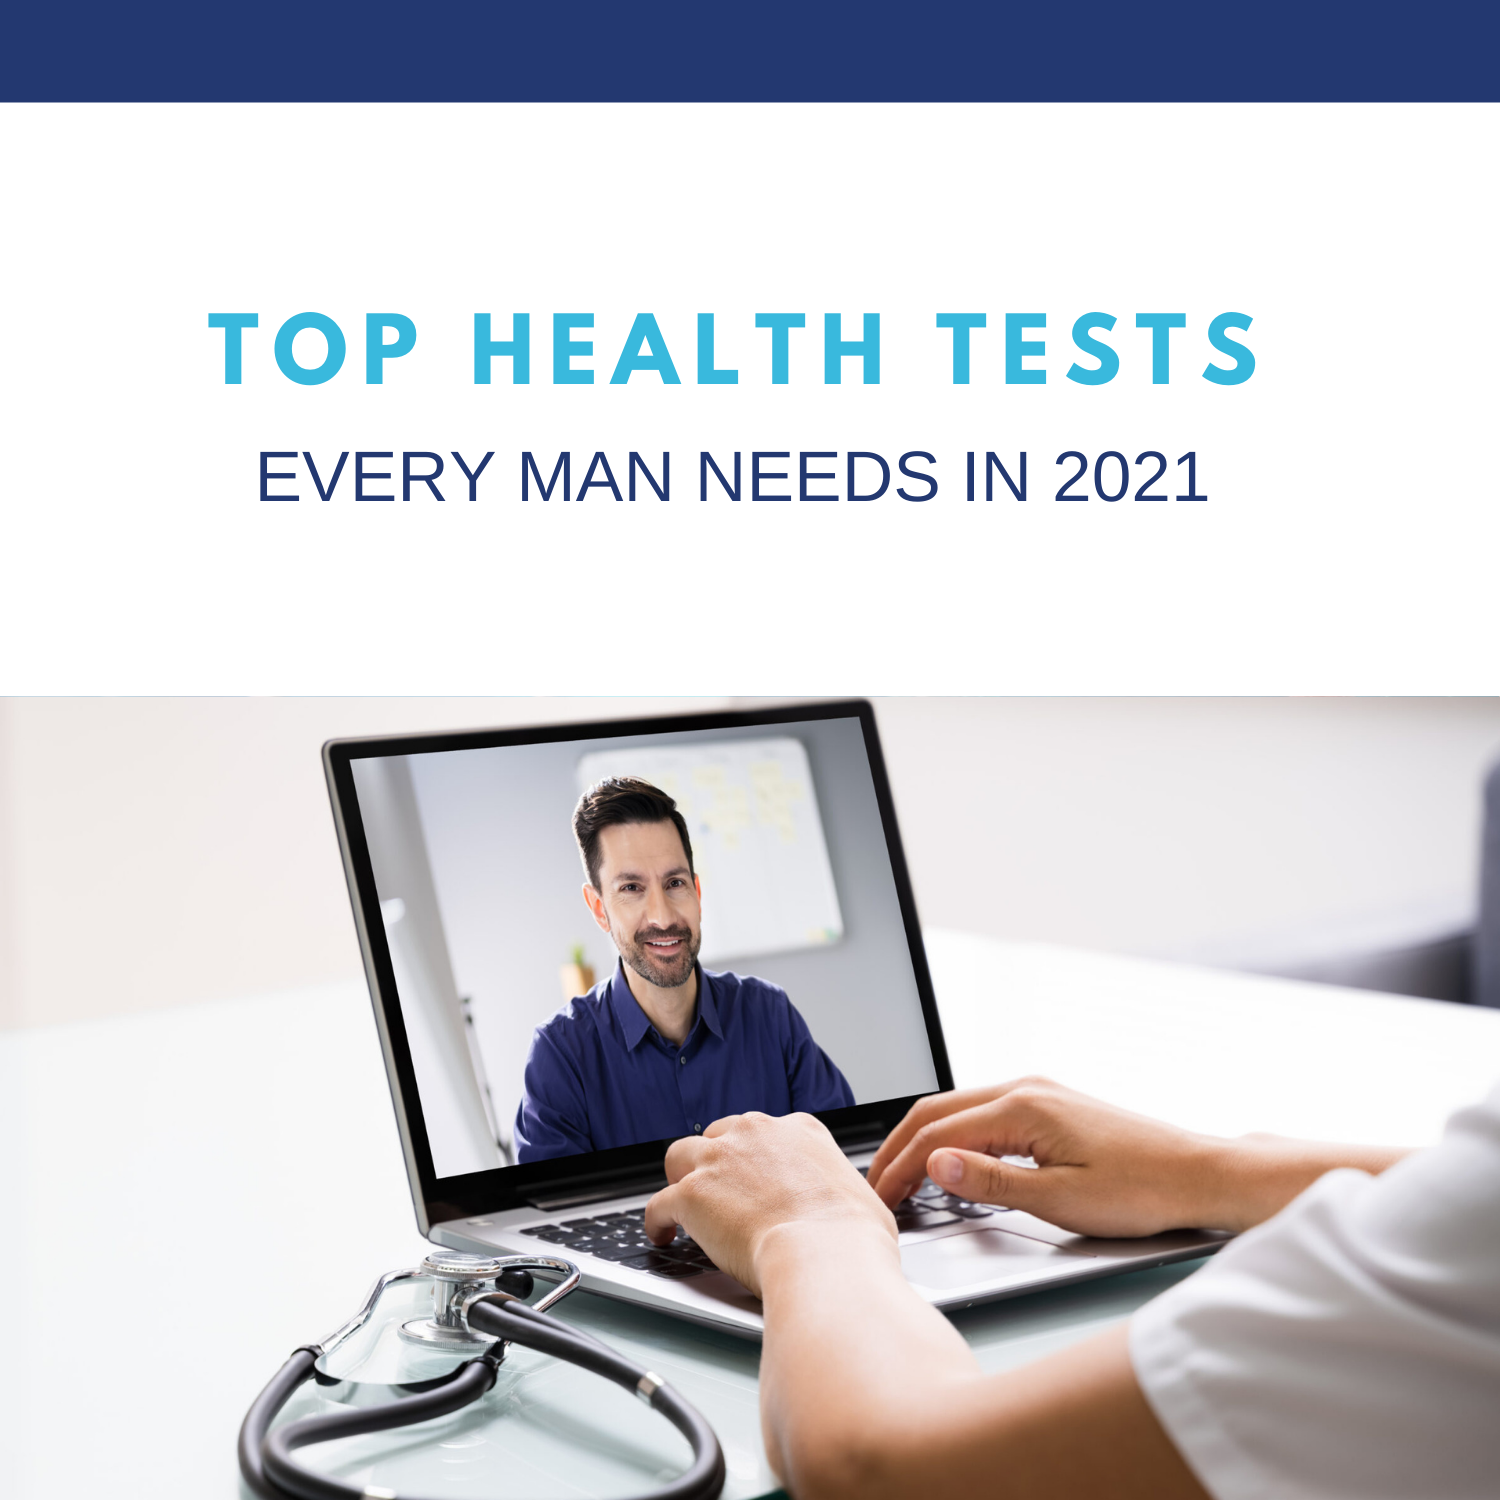 TOP health tests every man needs in 2021 | Gapin institute